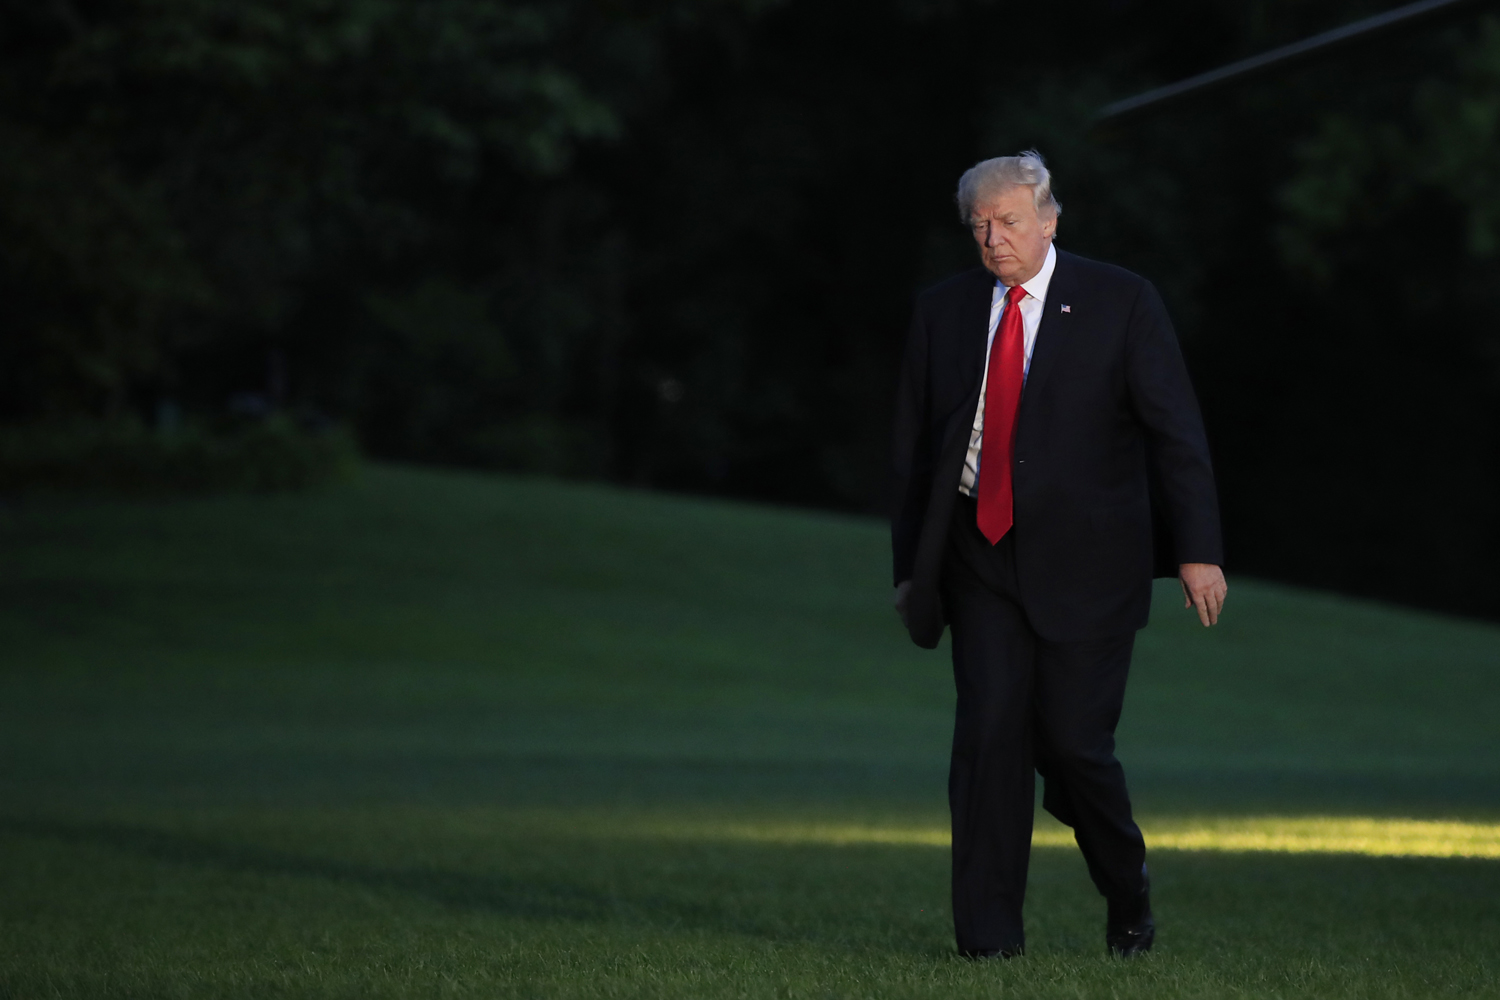 President Donald Trump walks on the South Lawn upon arrival the White House in Washington, Saturday, July 8, 2017, from the G20 Summit in Hamburg, Germany. (Manuel Balce Ceneta/AP)